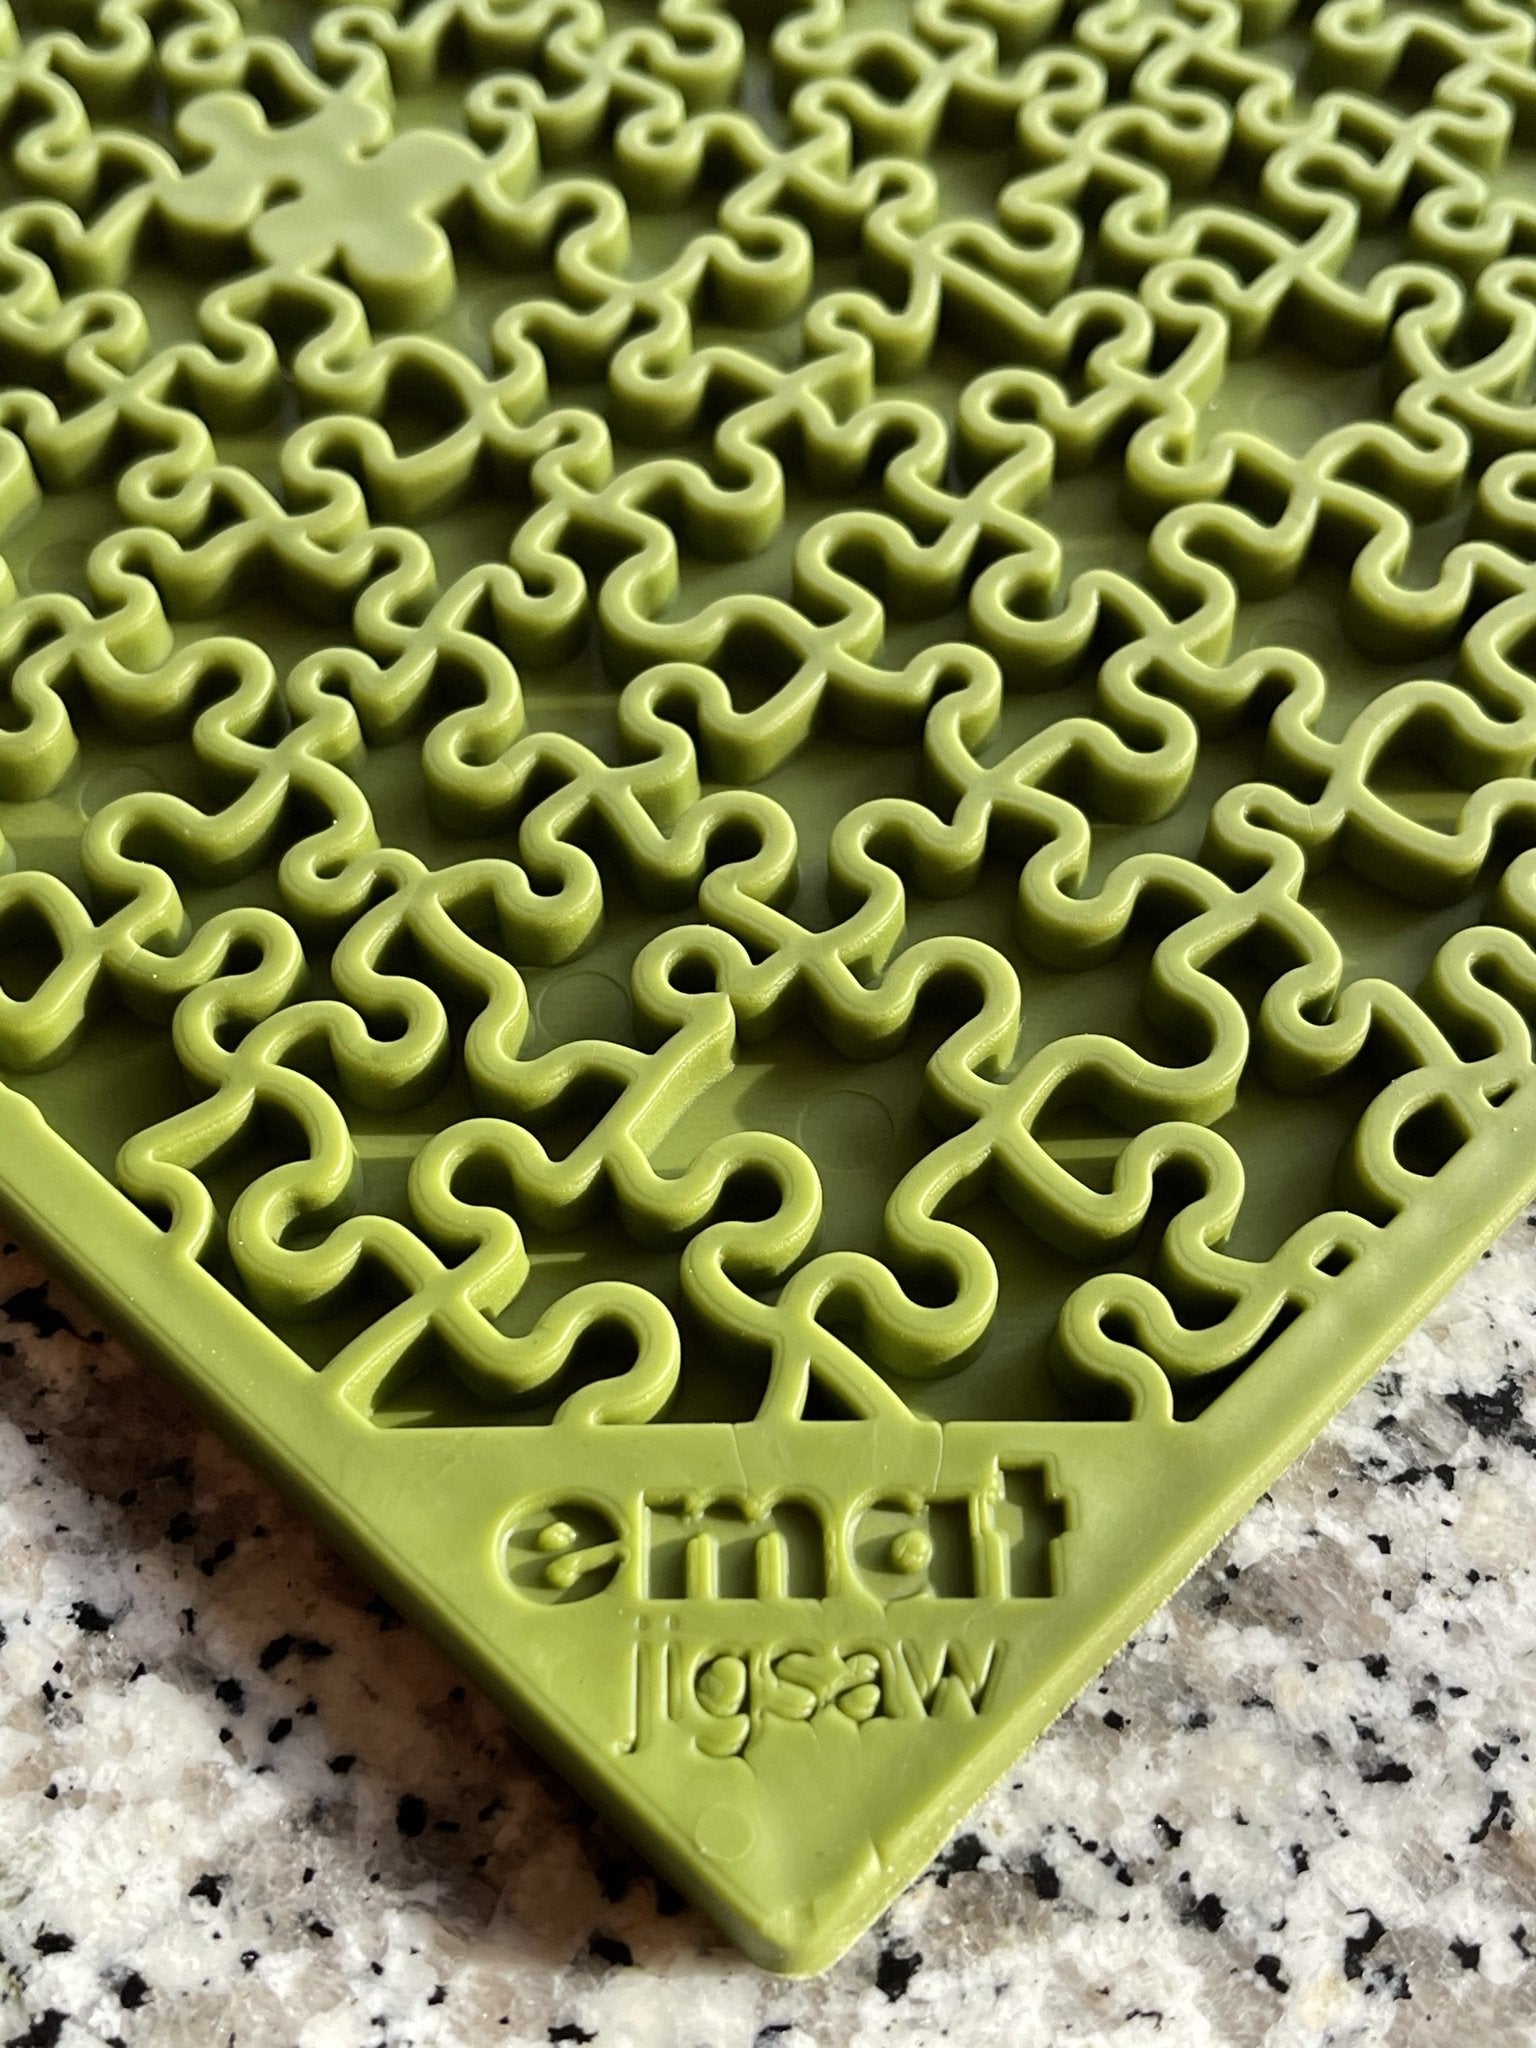 A close-up of a green, Soda Pup EMAT ENRICHMENT LICKING MAT jigsaw puzzle with unique interlocking pieces on a countertop, next to Soda Pup licking enrichment mats.